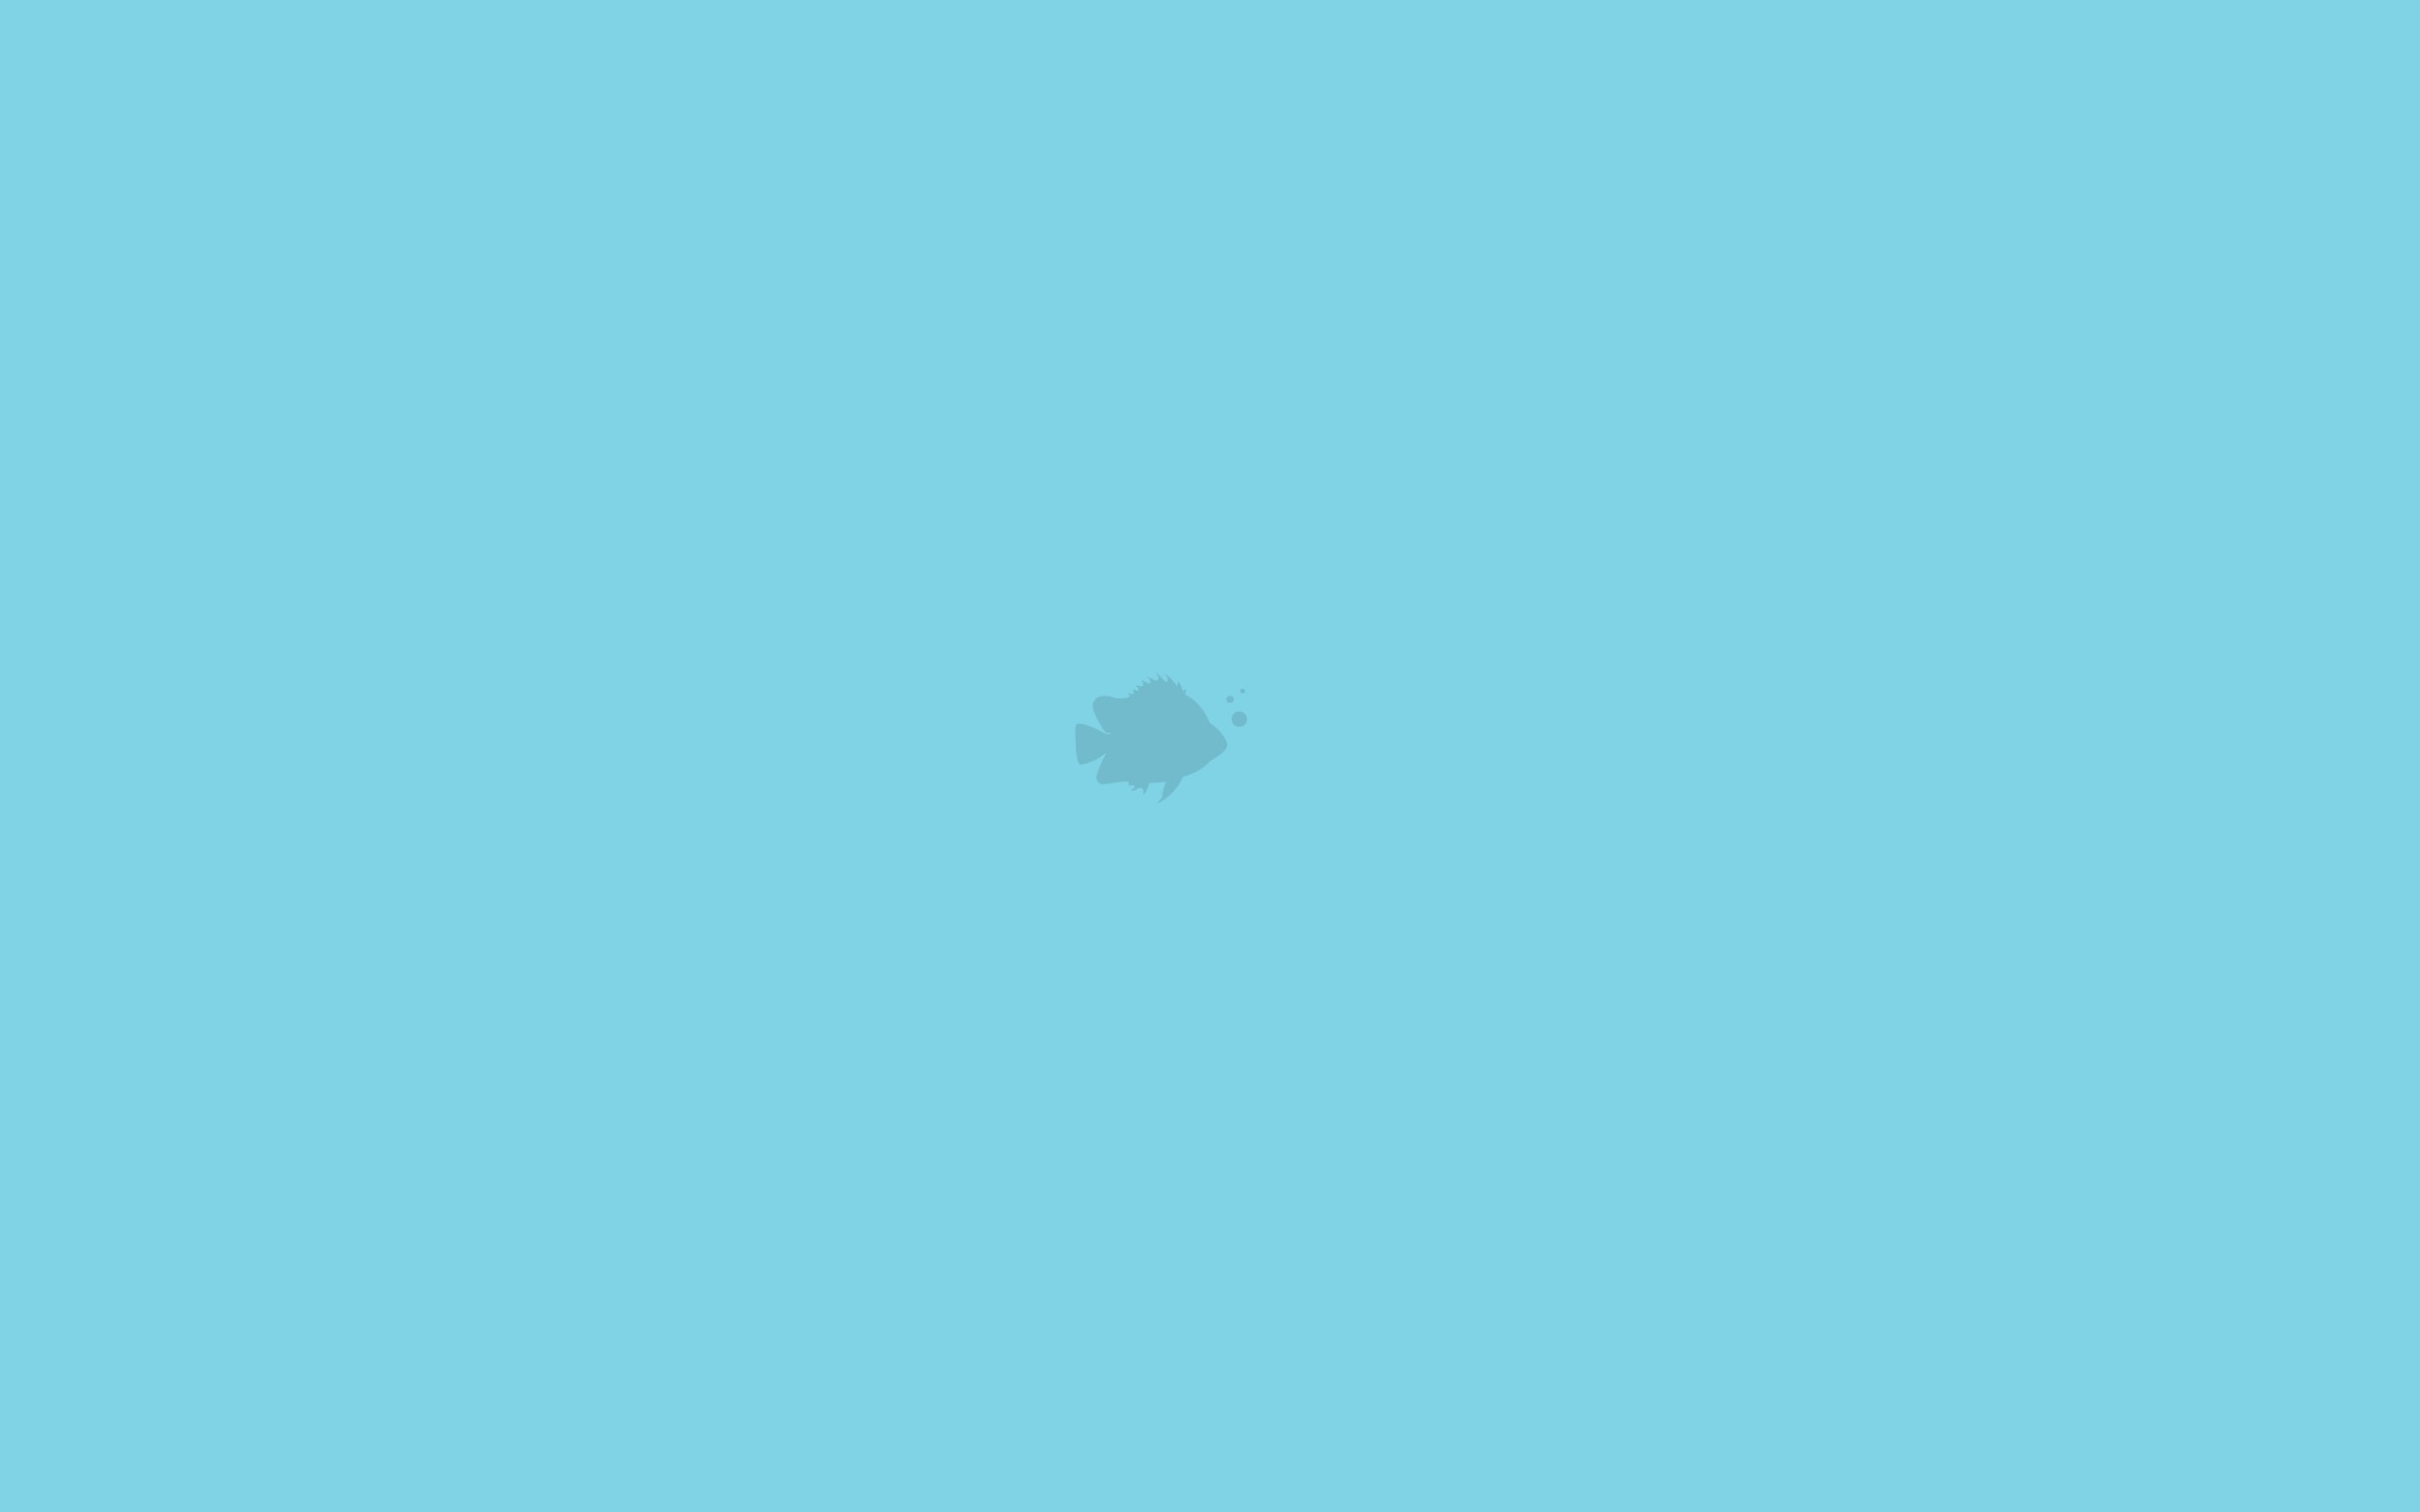 2560x1600 Minimalist wallpaper you have ever seen cool simple and minimalist